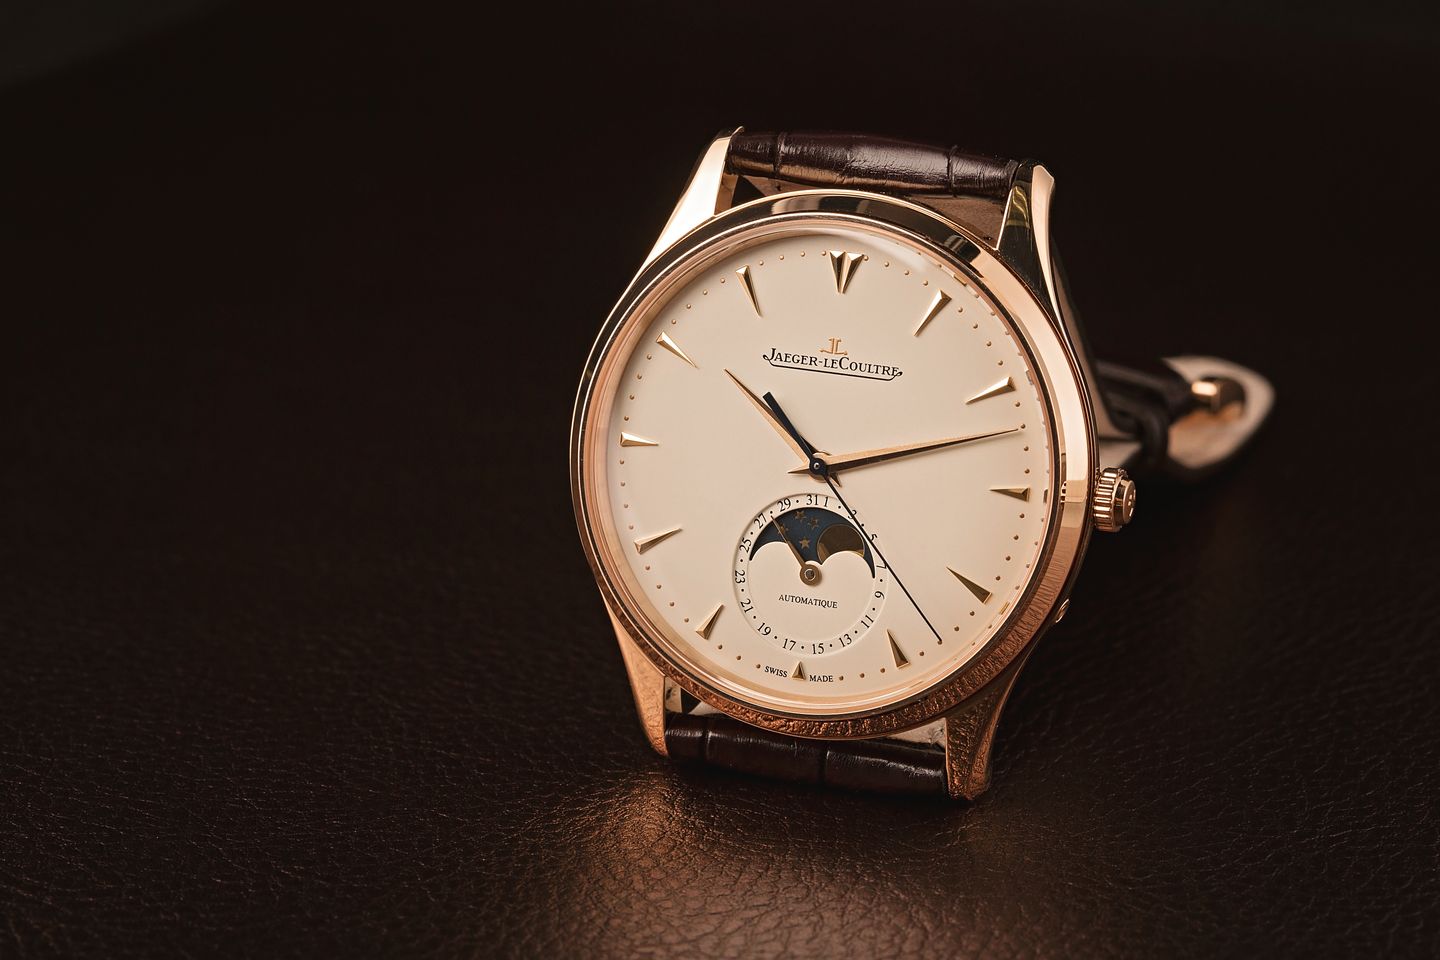 Popular Luxury Watch Brands and How To Pronounce Their Name